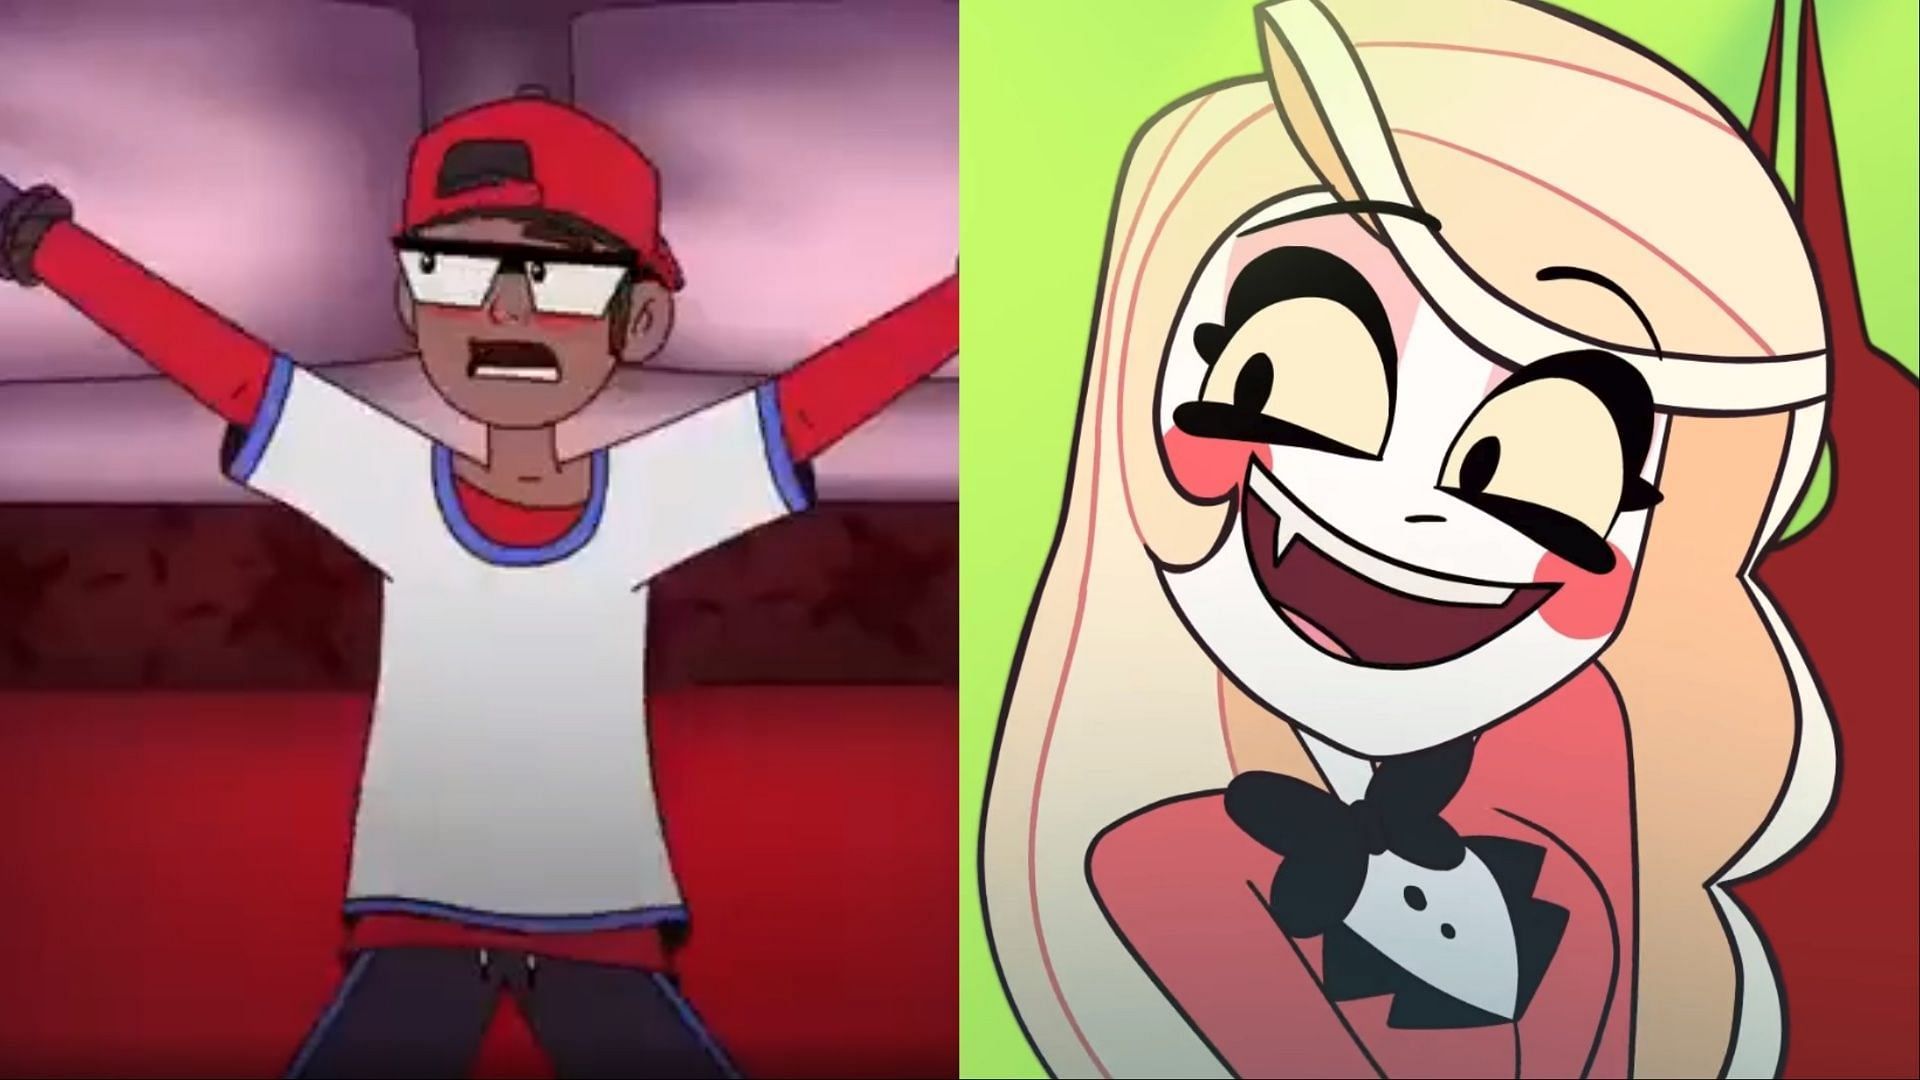 Hazbin Hotel Controversy Explained: Verbalase Allegations & Drama